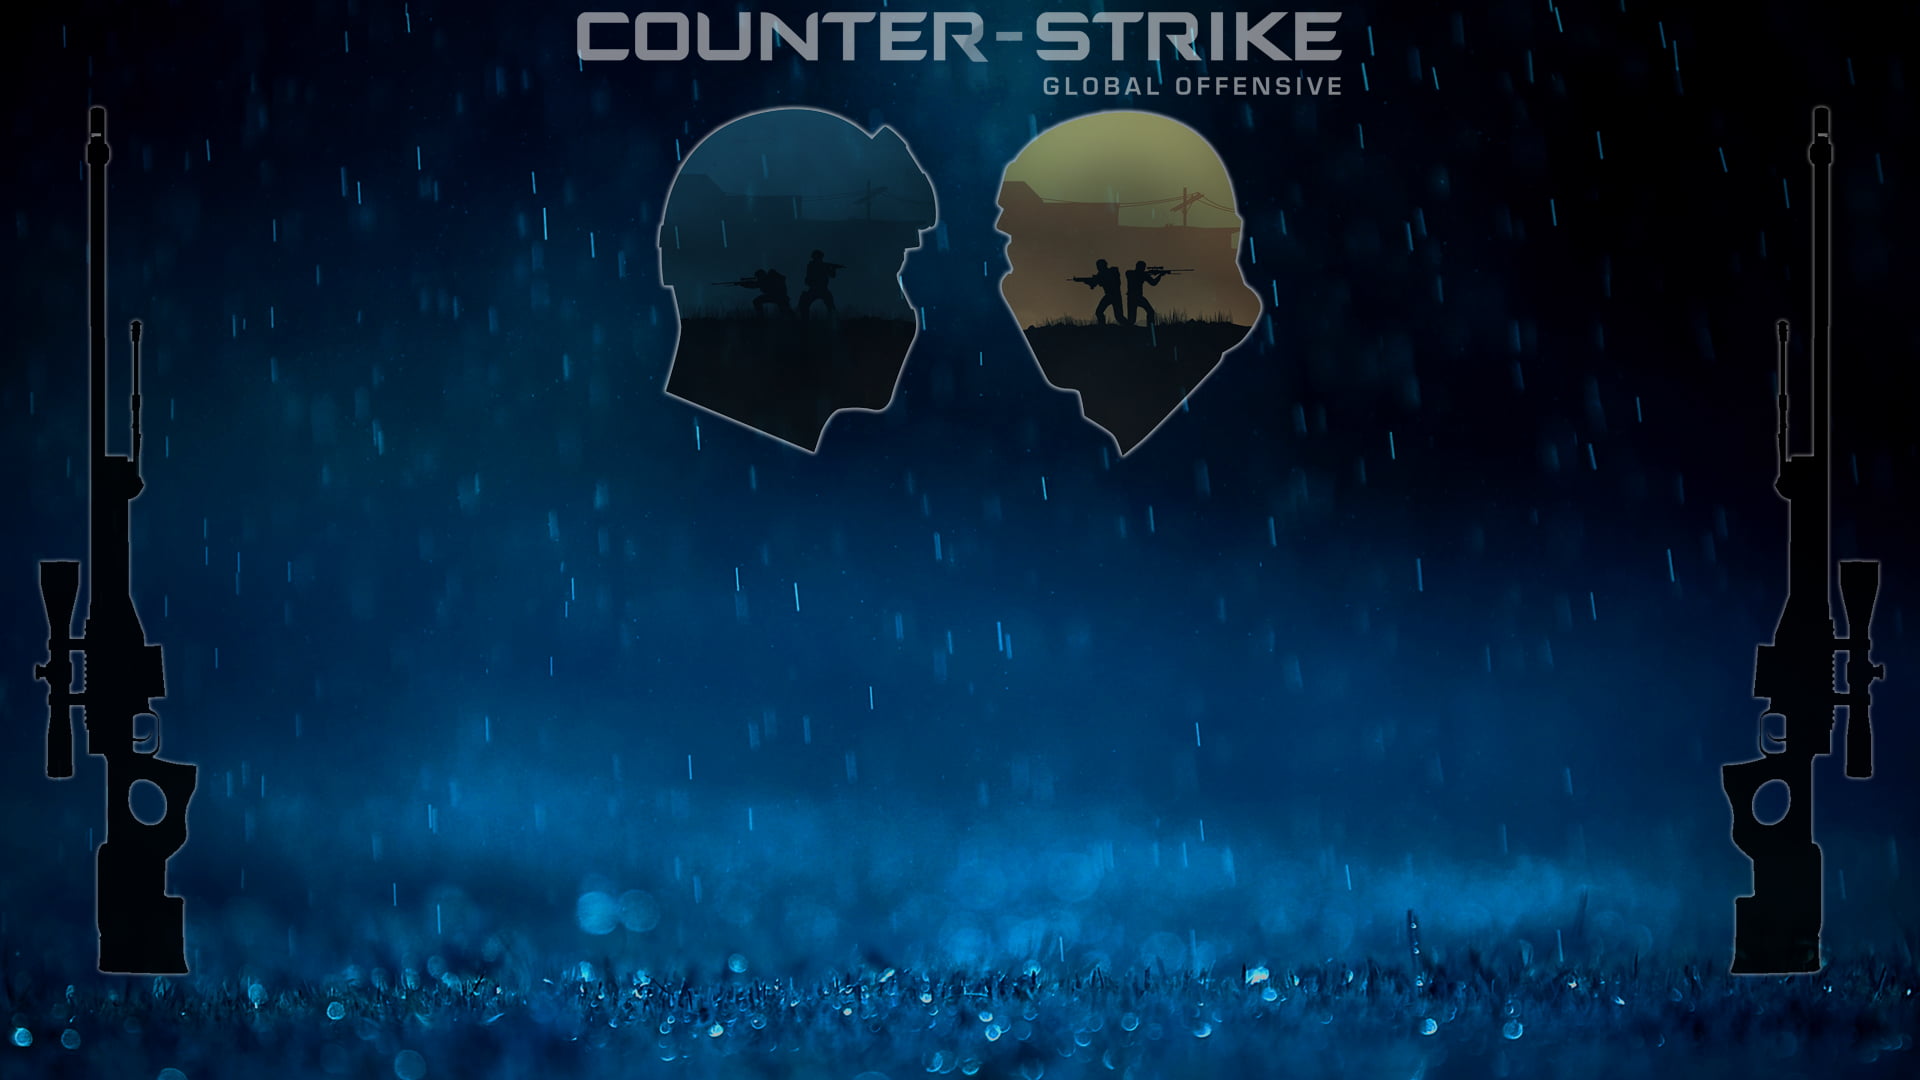 Counter Strike game poster, Counter-Strike: Global Offensive, Accuracy International AWP, Counter-Strike